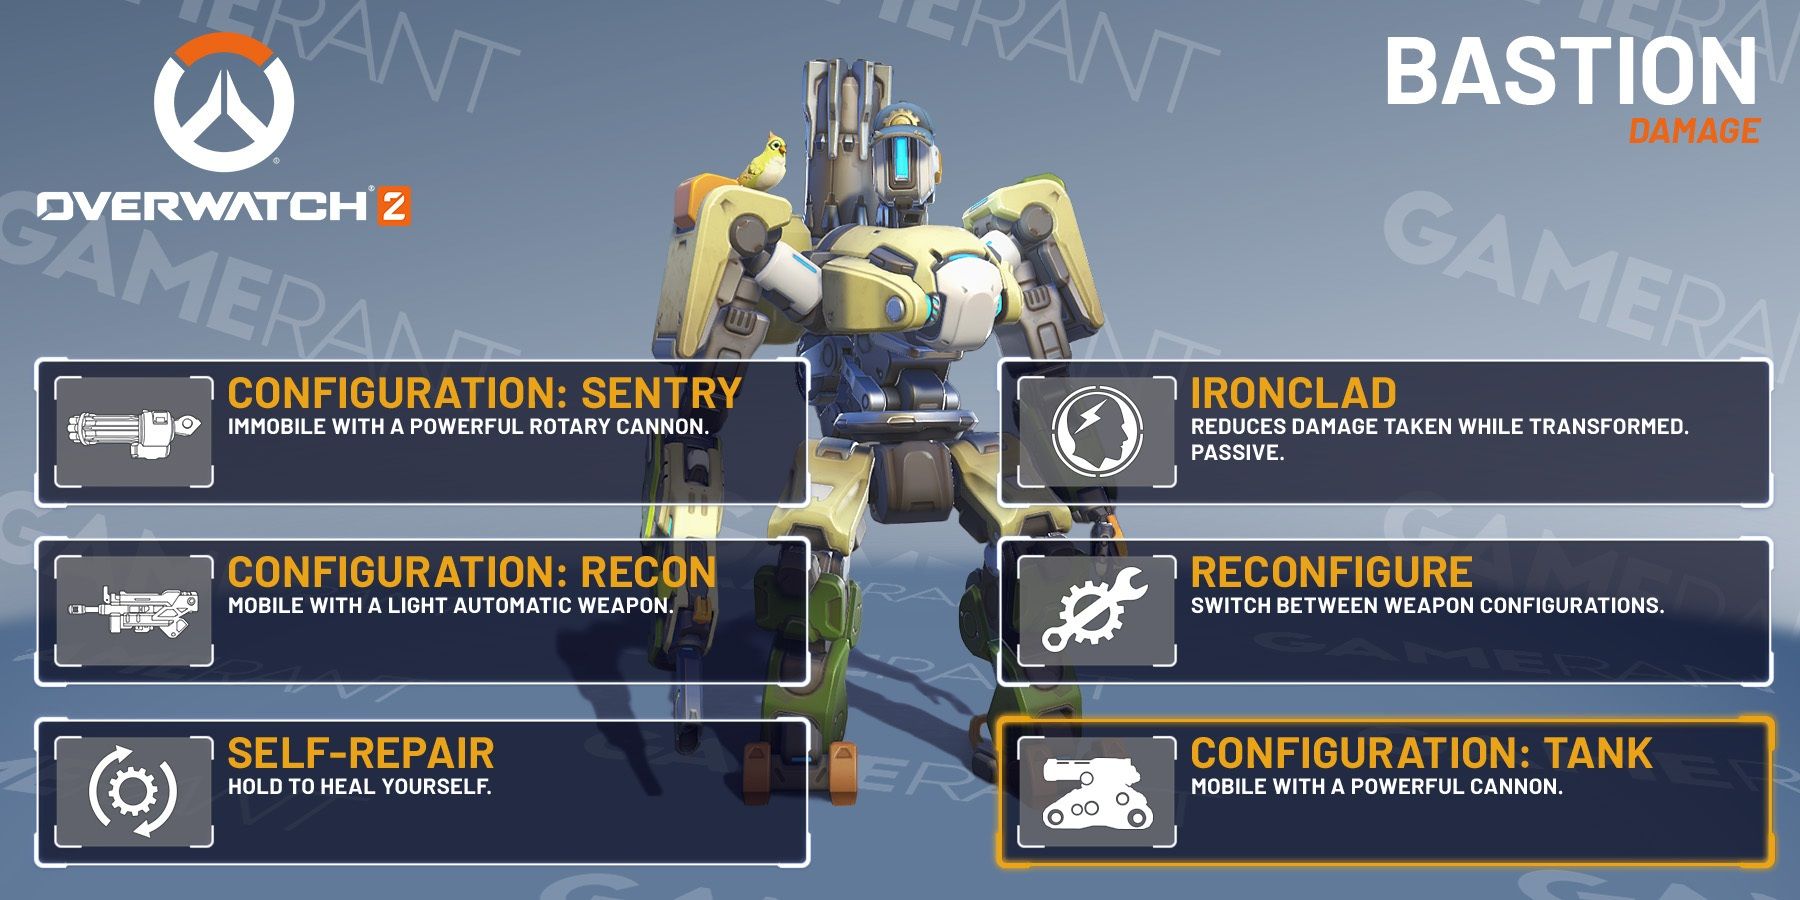 Overwatch 2 Bastion Overview